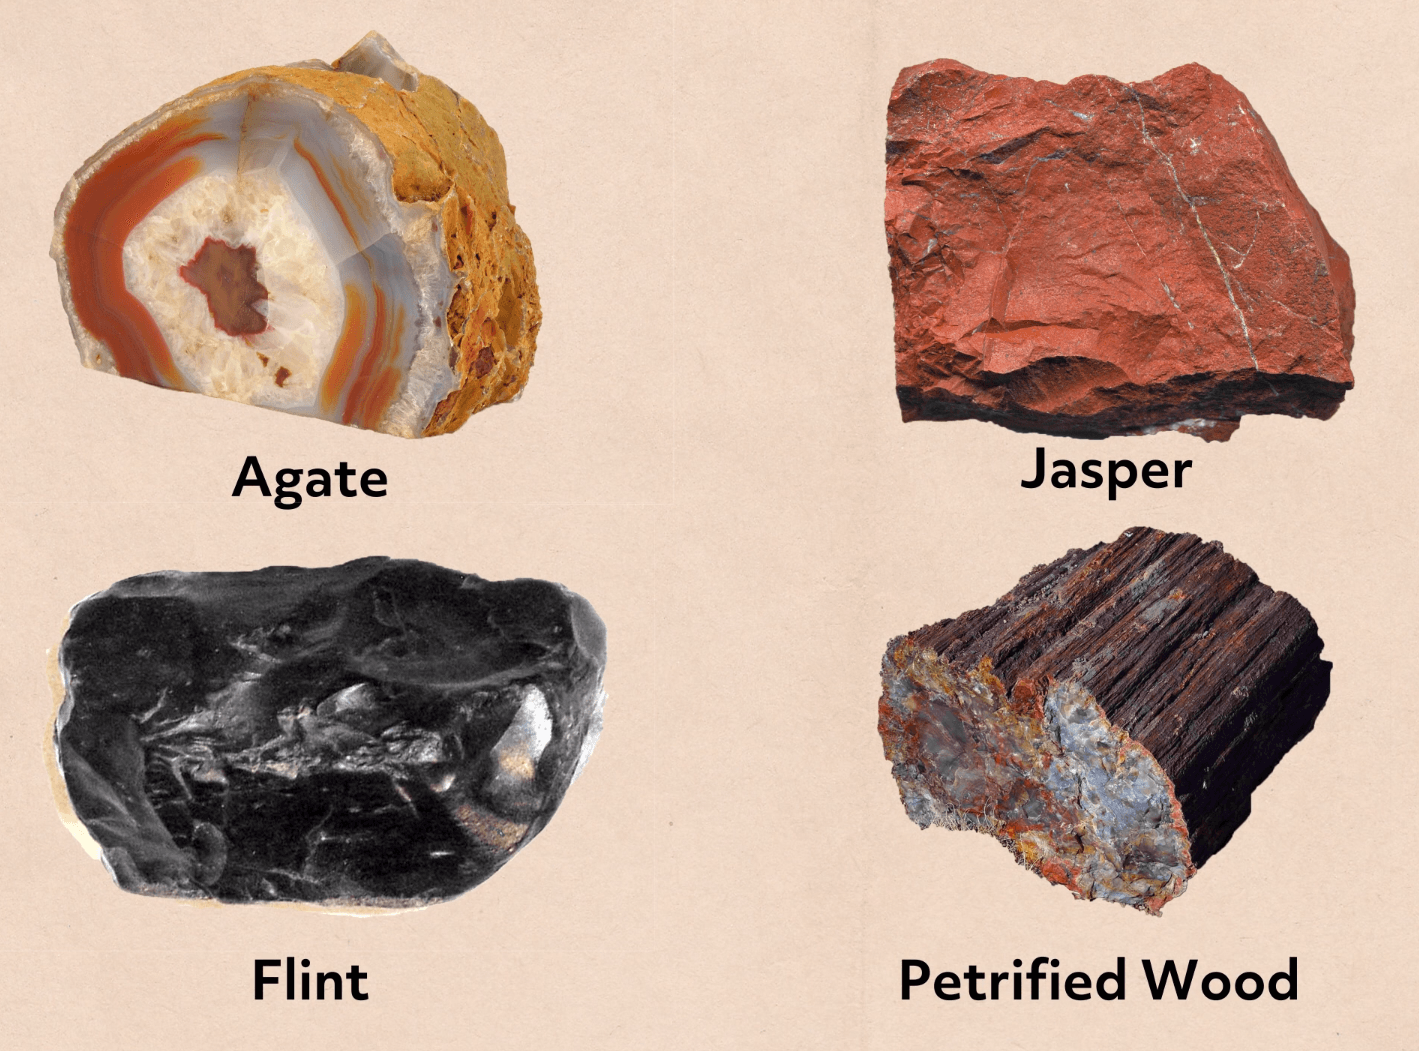 Four rocks are shown, labeled from top-left to bottom-right as "Agate," "Jasper," "Flint," and "Petrified Wood."